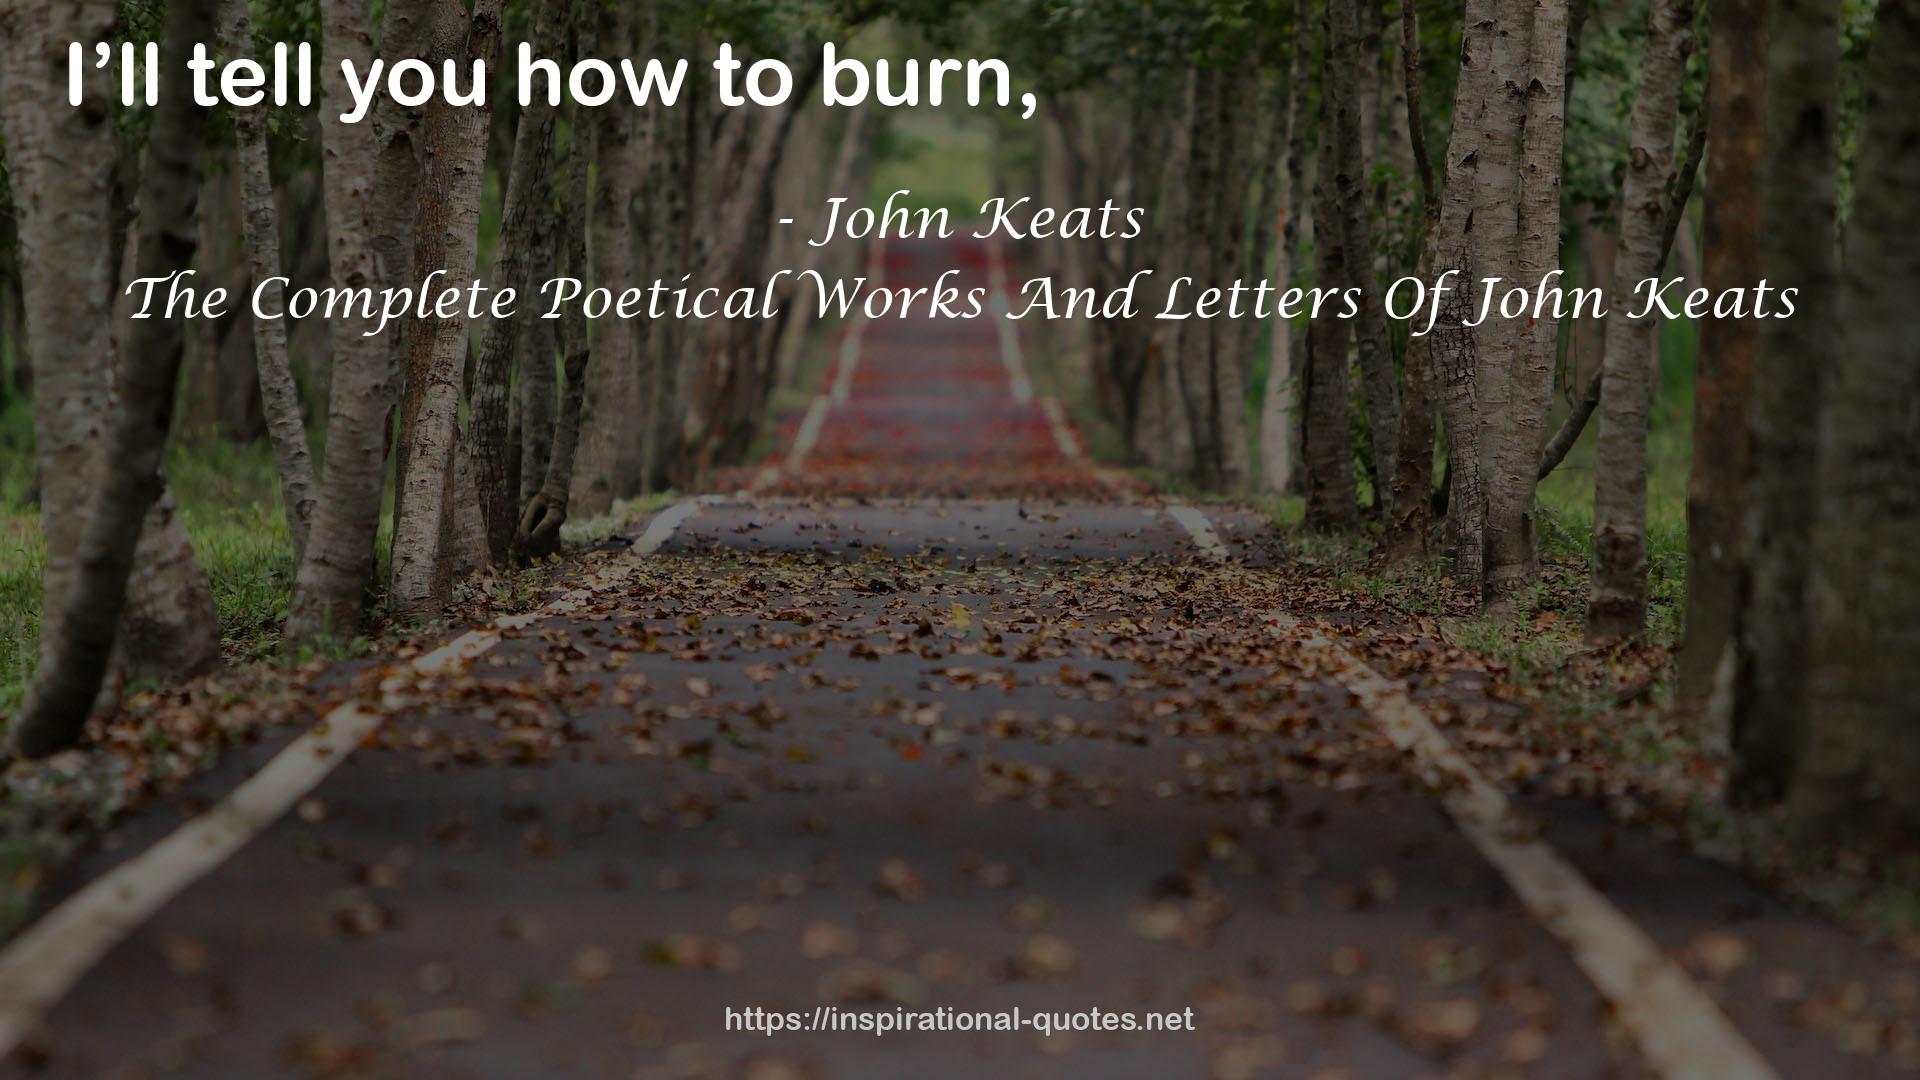 The Complete Poetical Works And Letters Of John Keats QUOTES